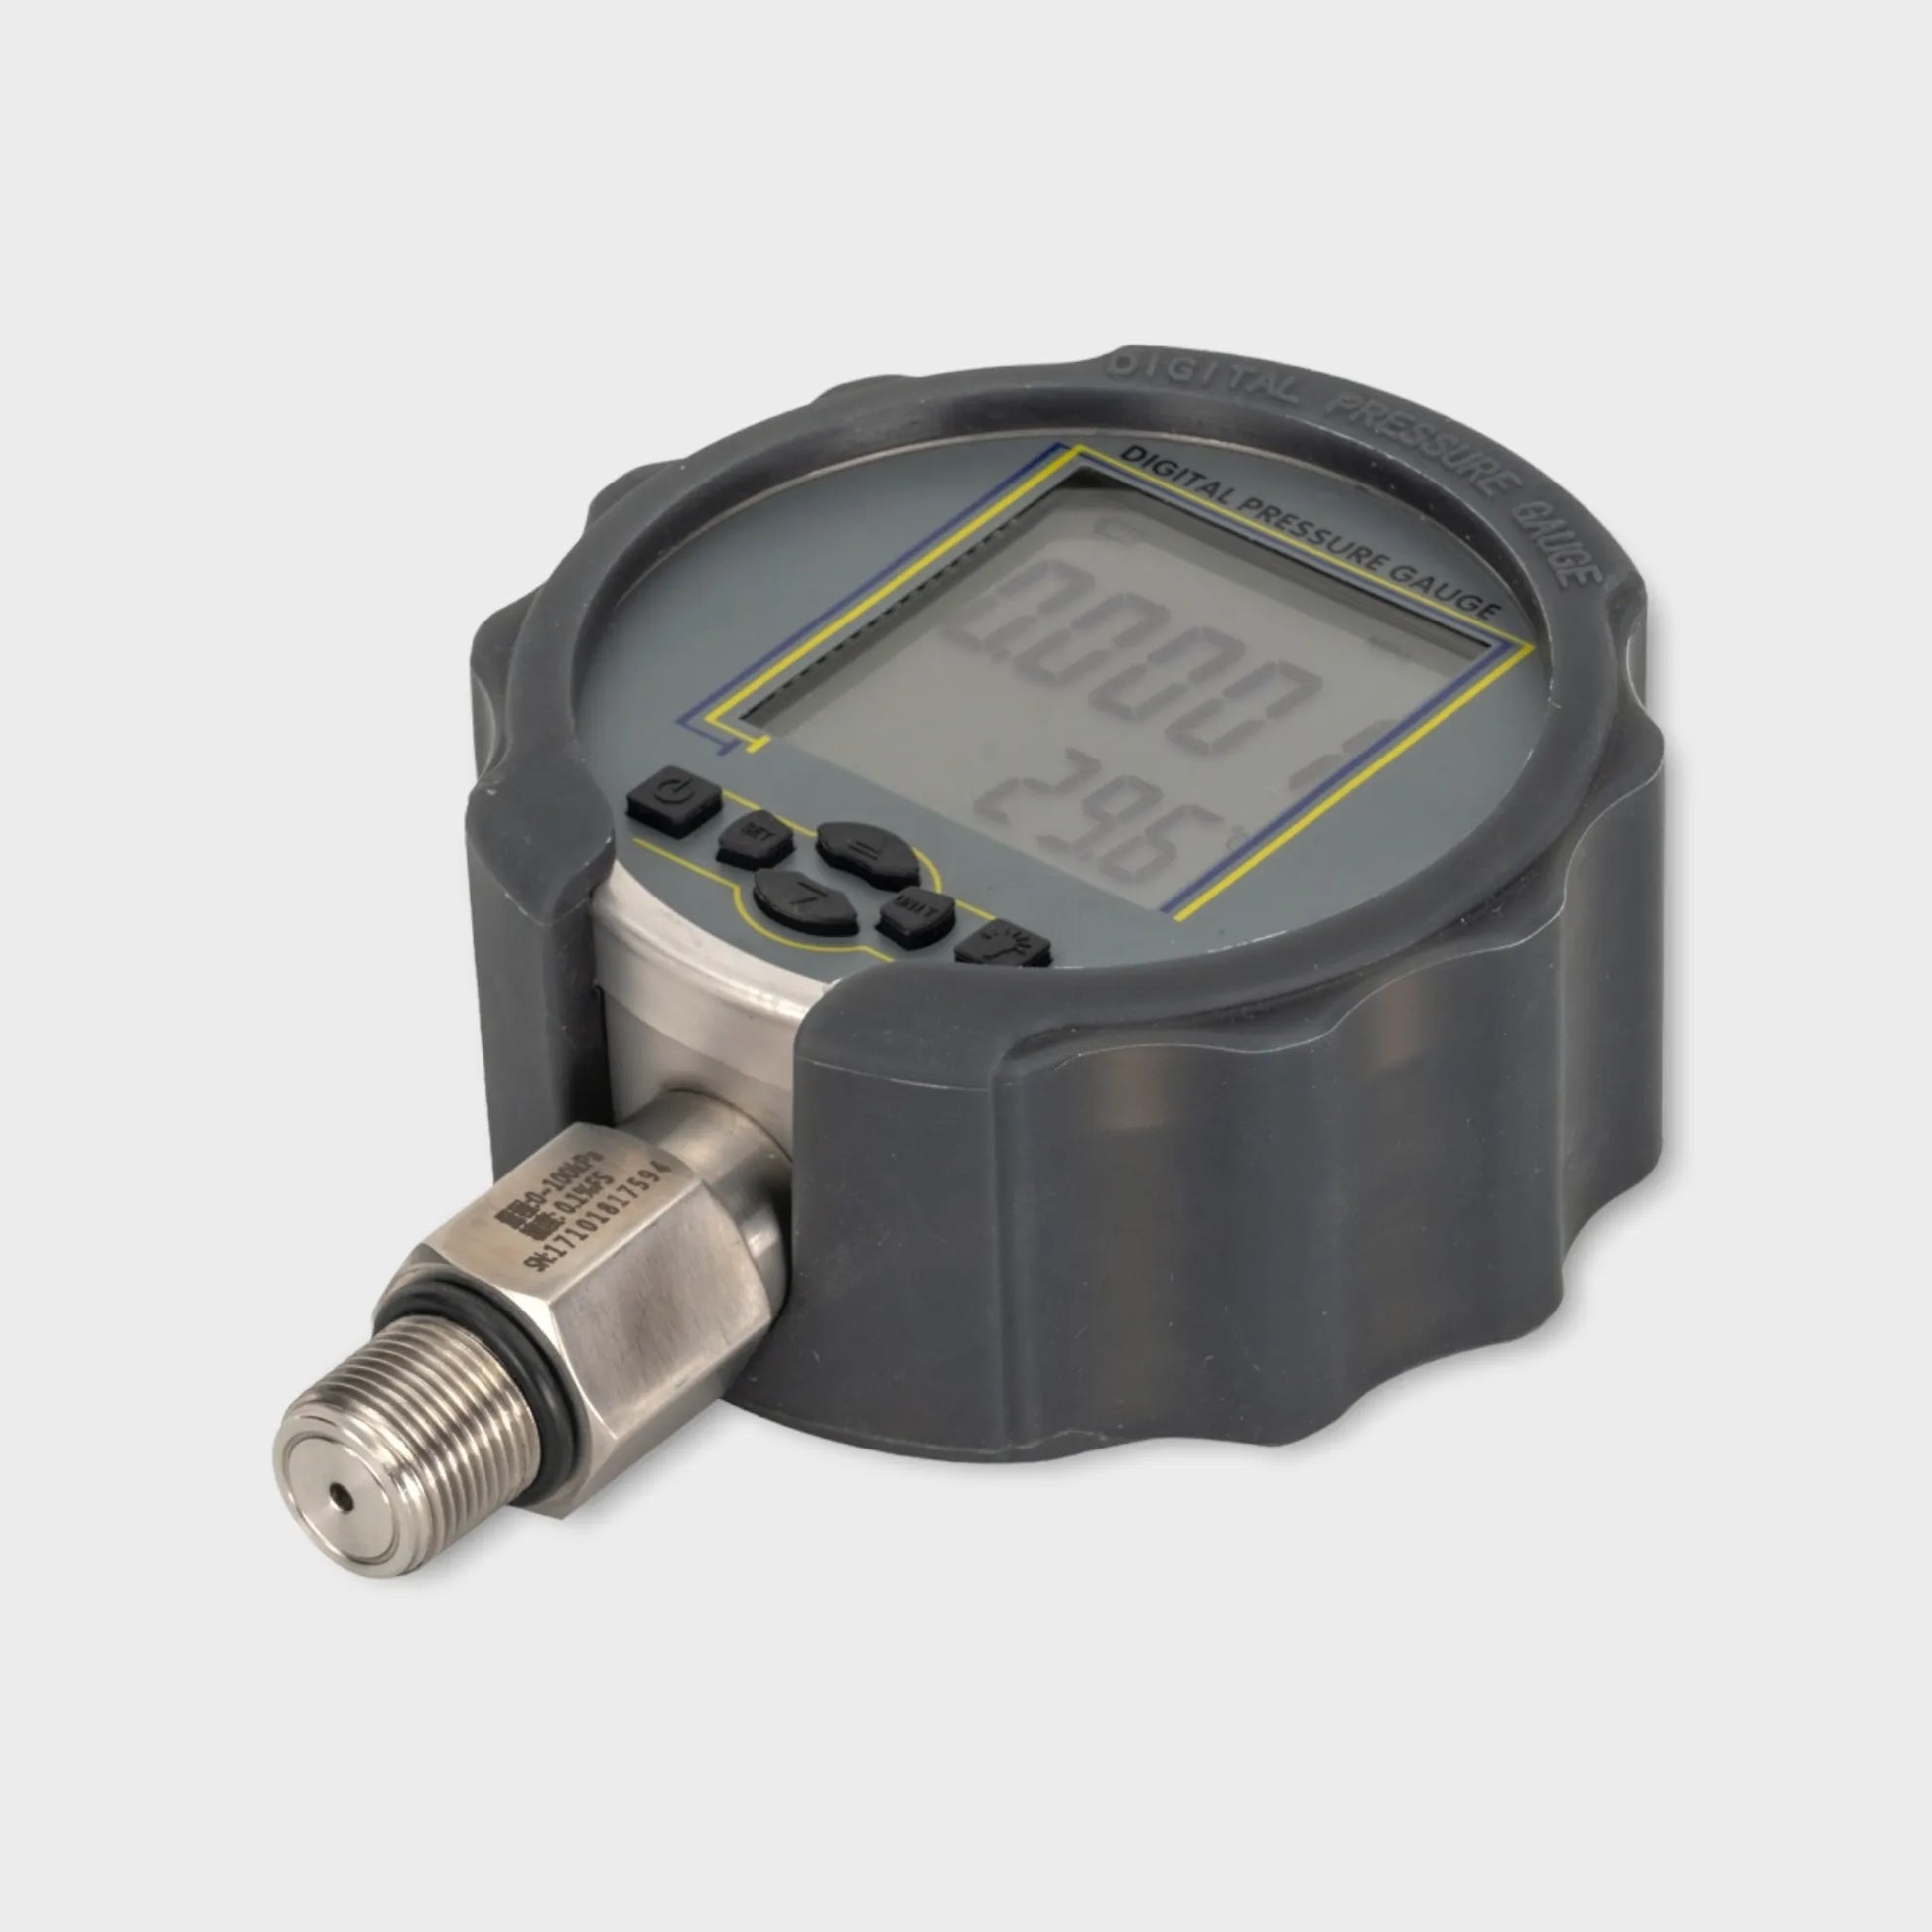 Wesen D210 Series High Precision Digital Pressure Gauge with SS Connection